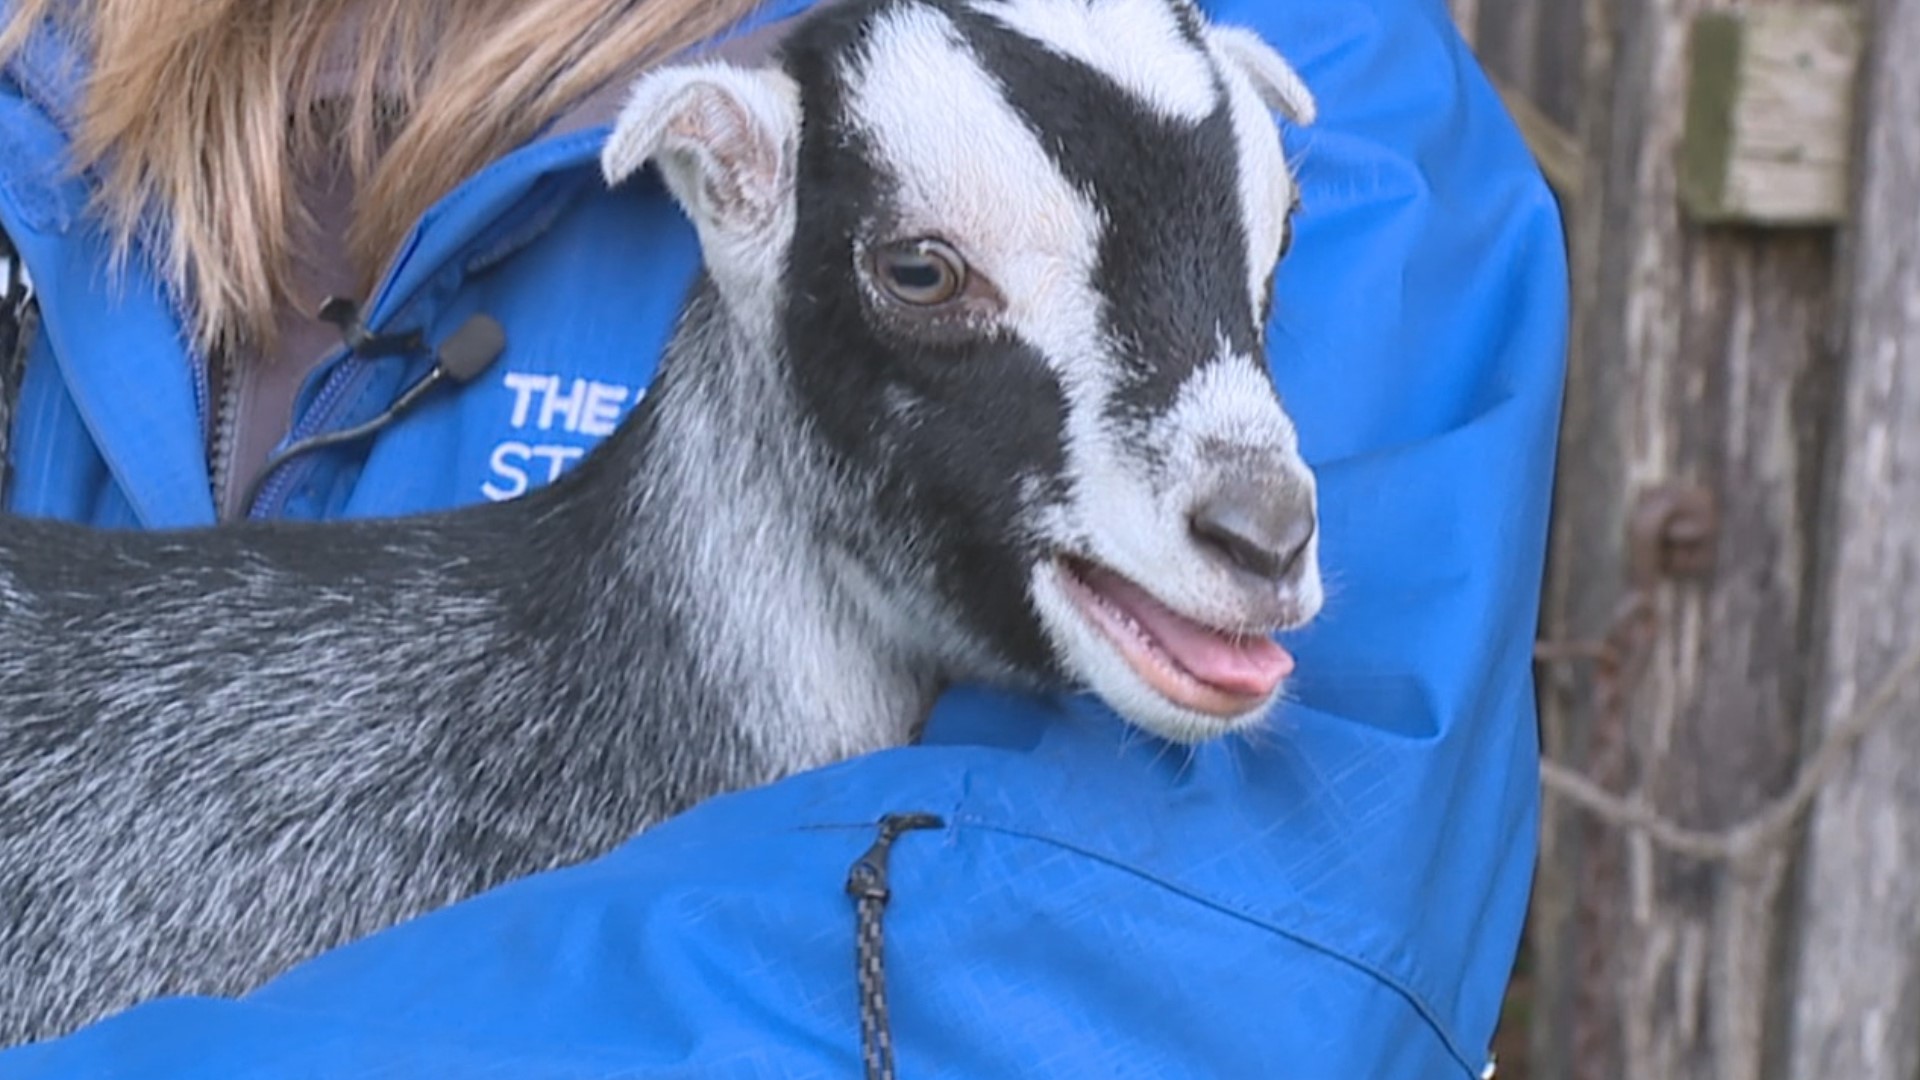 A farm in the Poconos is inviting you to get up close and personal with some of its furrier residents. 
It's all about preserving Pennsylvania's farming heritage.